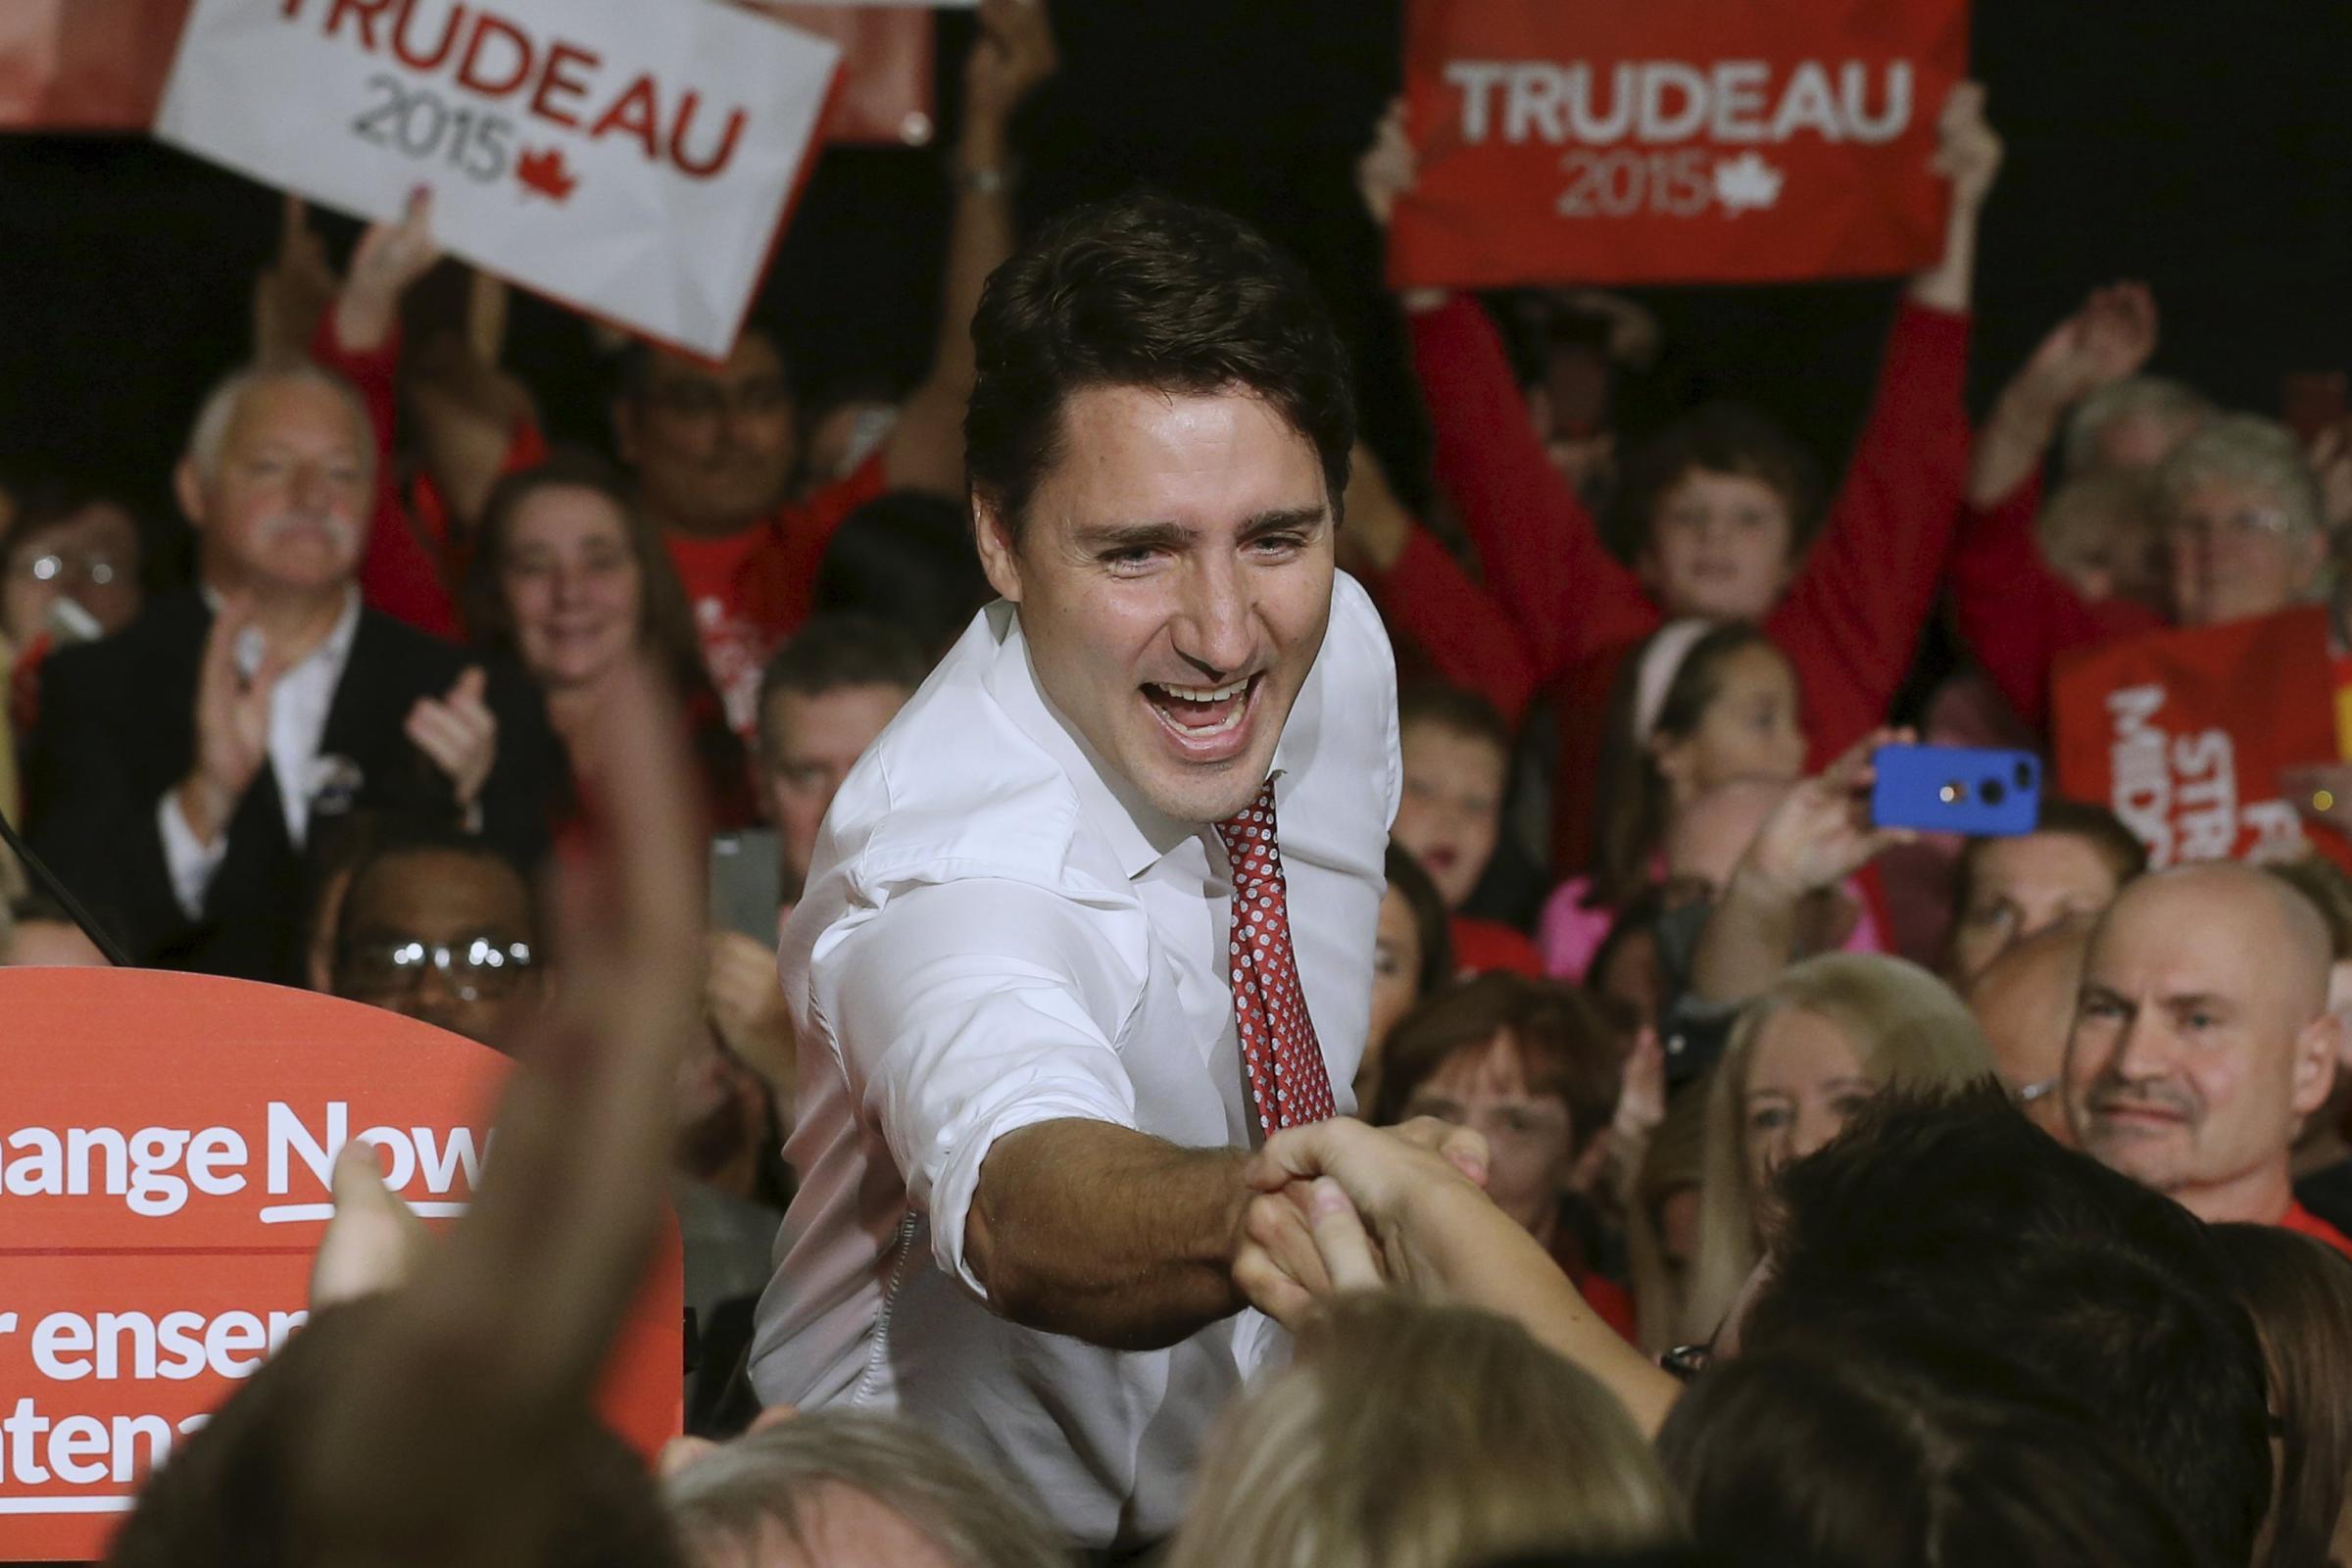 Trudeau attends a campaign rally in Halifax